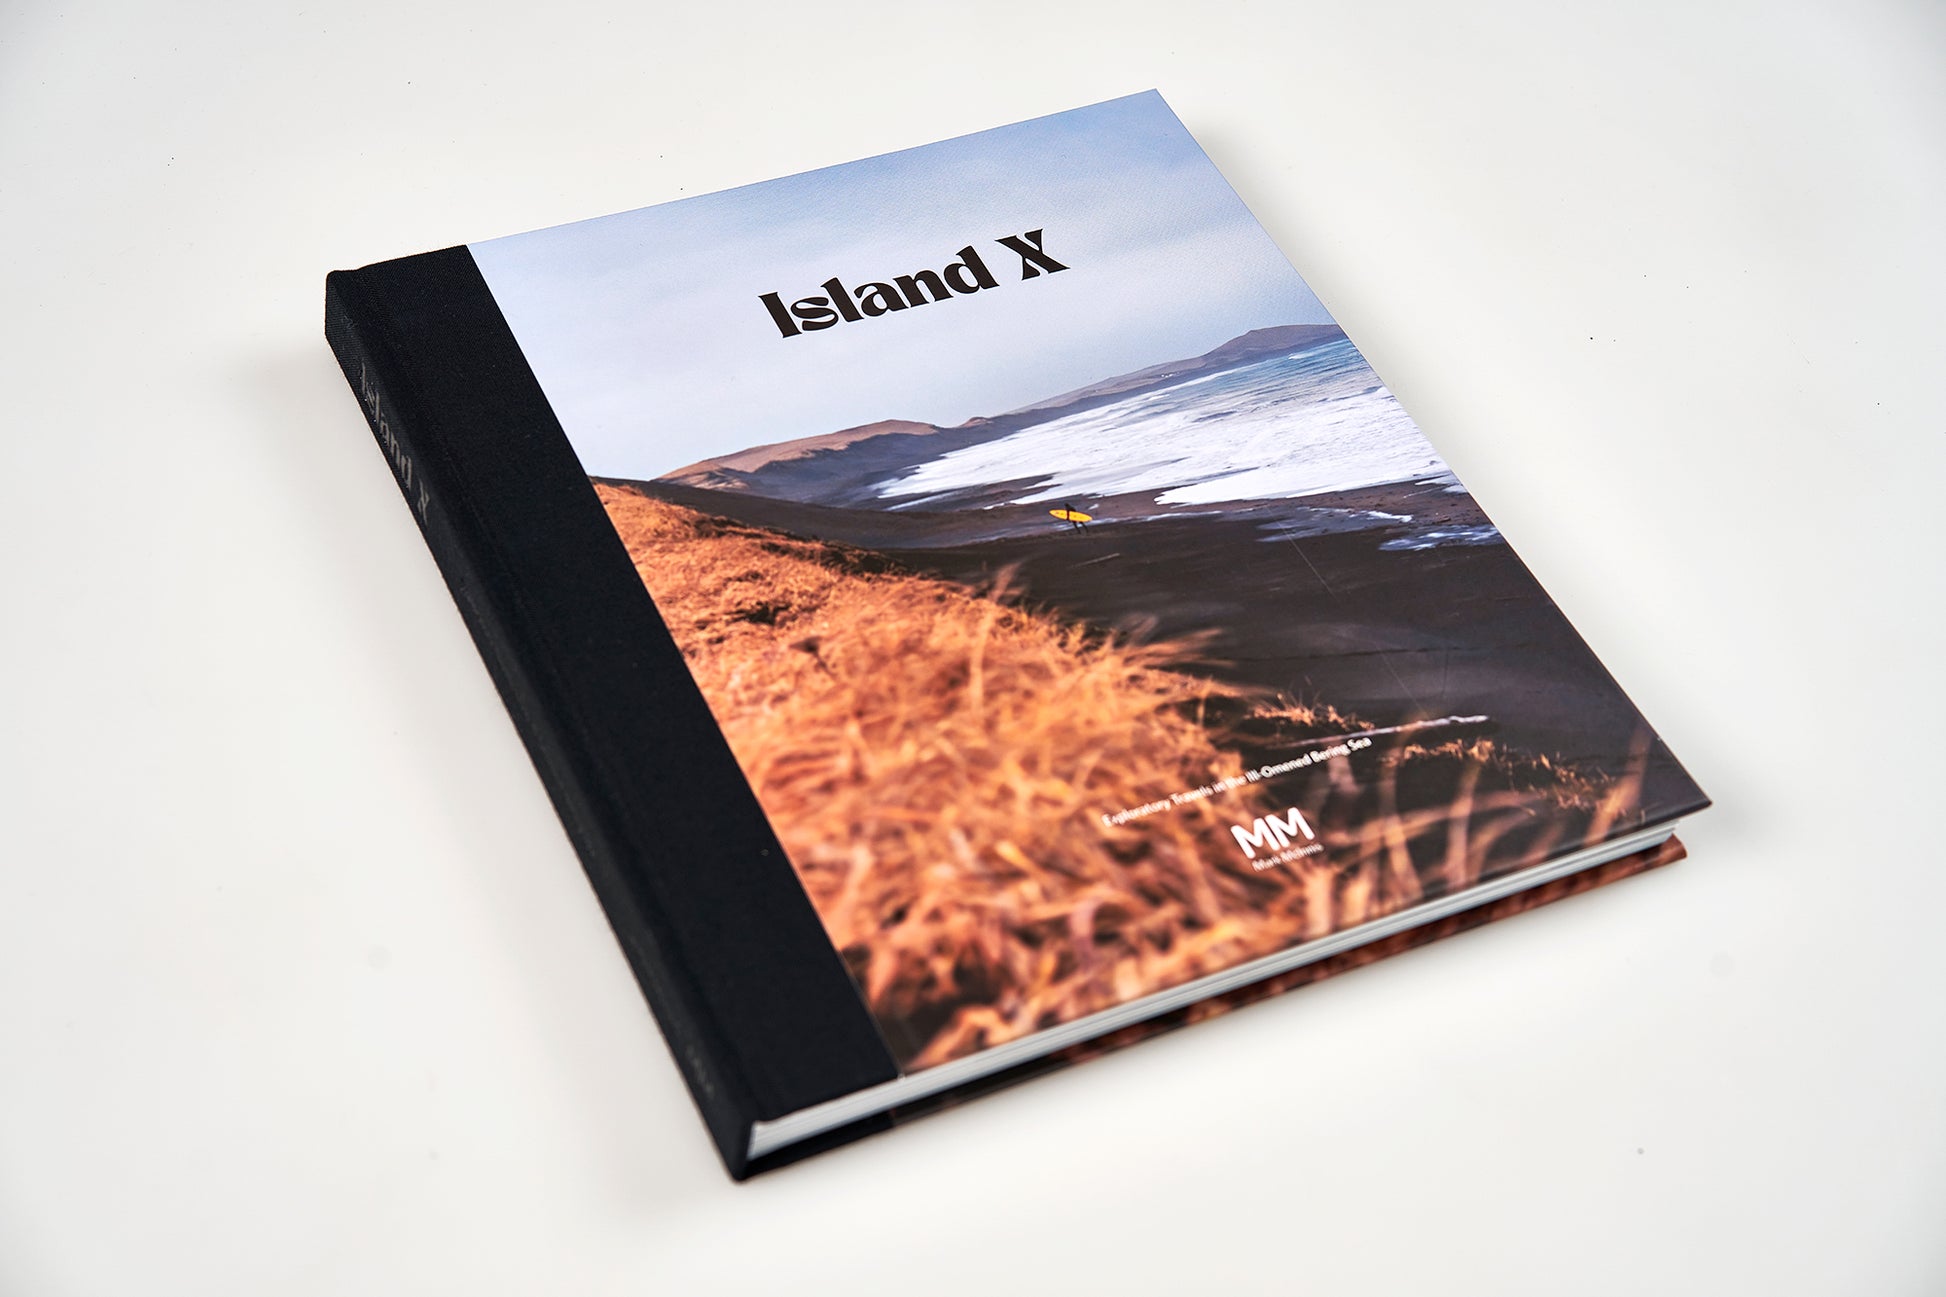 Island X- A photography book by Mark McInnis- Limited edition front cover with fabric spine-2